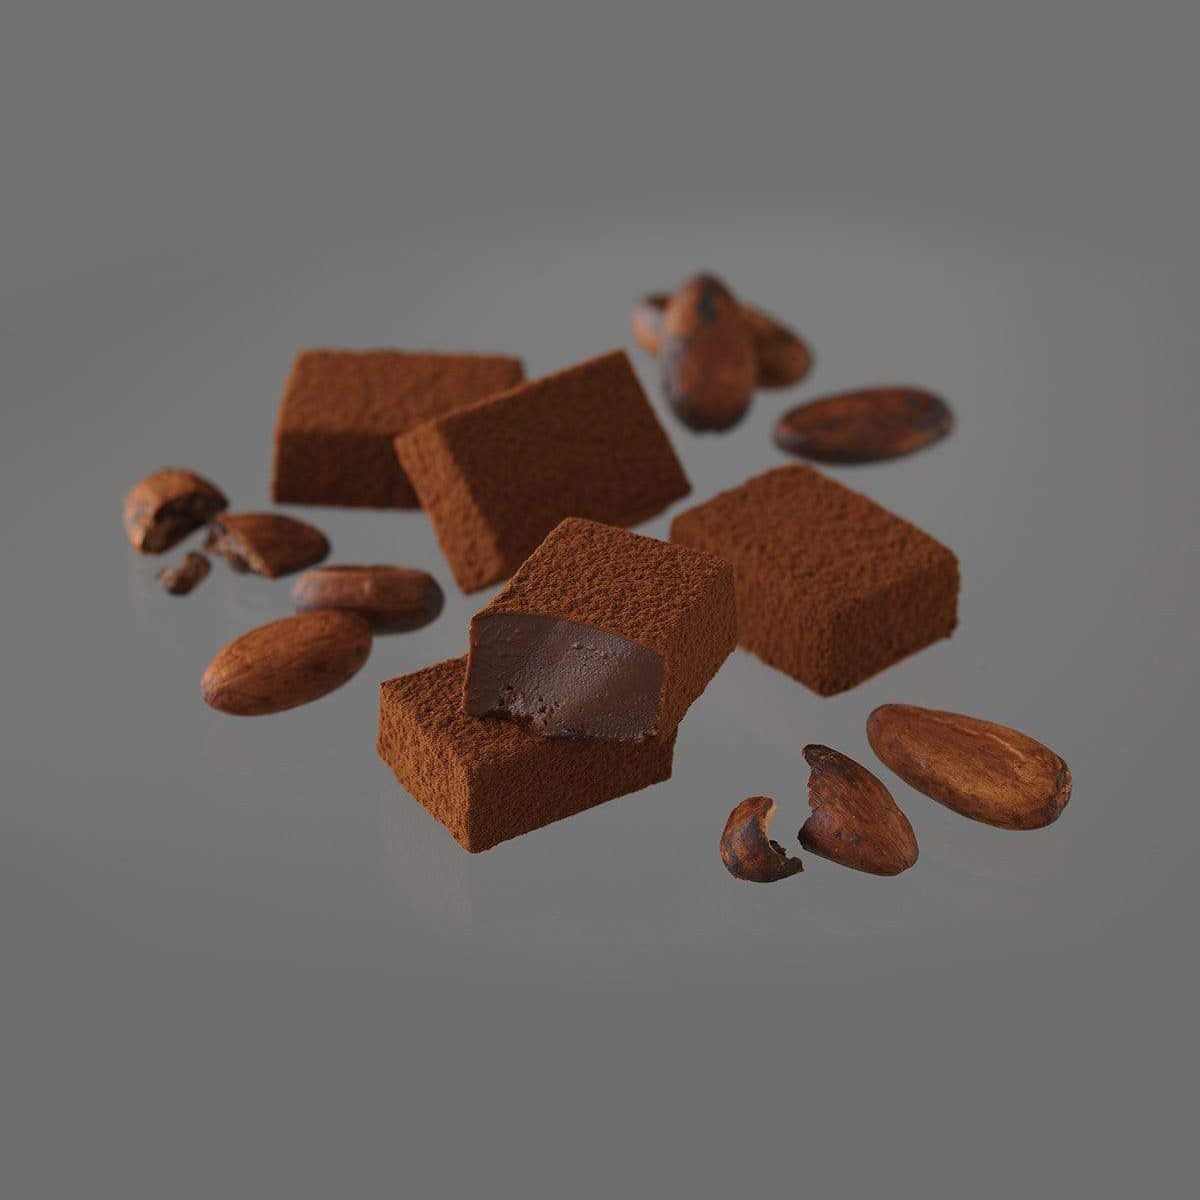 ROYCE' Chocolate - Nama Chocolate "Ghana Bitter" - Image shows brown blocks of chocolates and rounded brown cacao beans with a gray background.